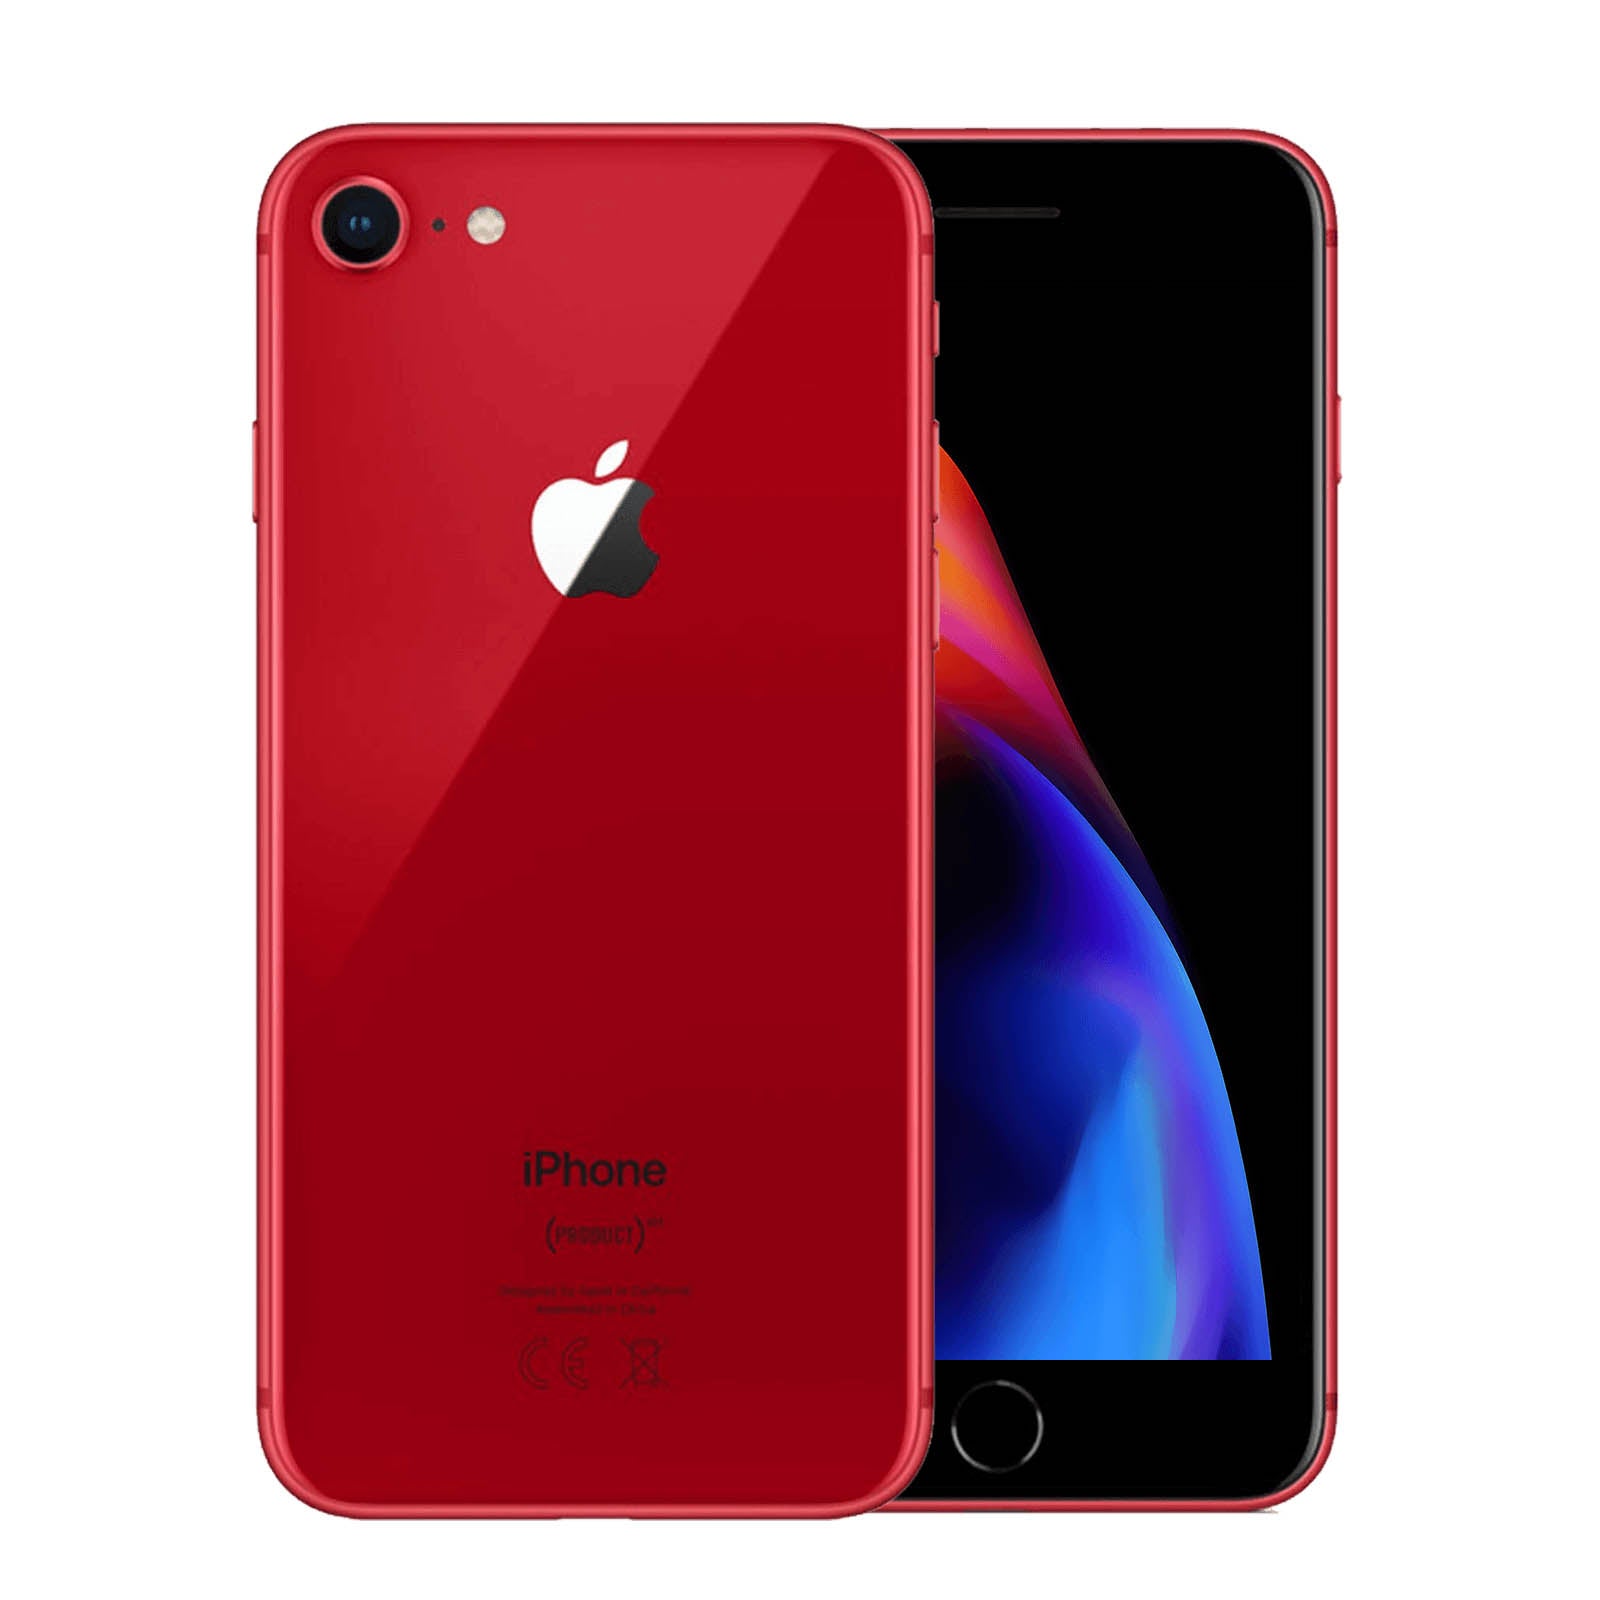 Apple iPhone 8 128GB Product Red Good - Unlocked